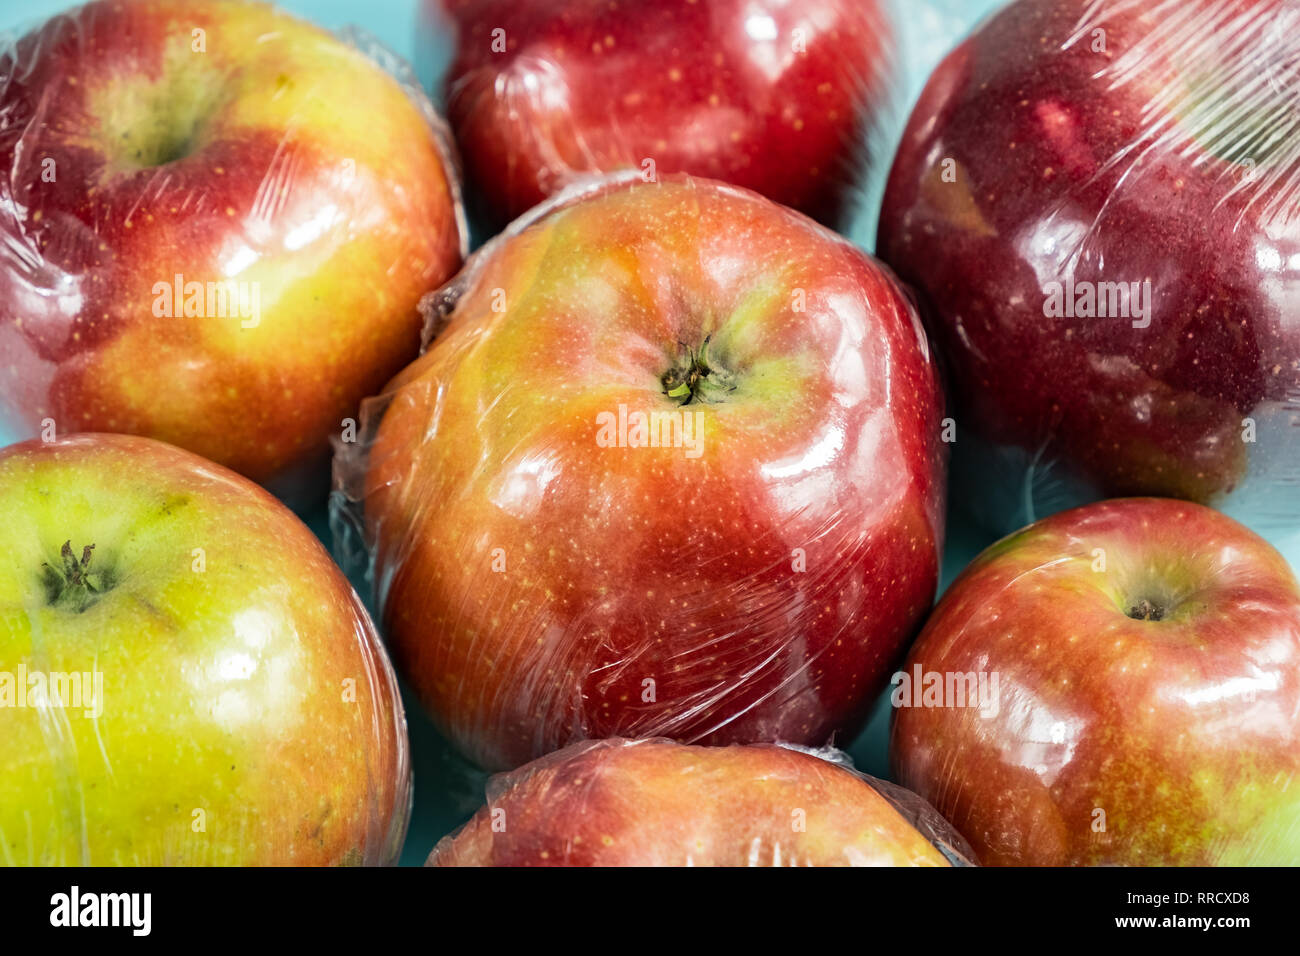 Excessive plastic use concept: fresh apples in kitchen wrap. Unreasonably over-packaged food products: fresh fruit in plastic wrap, close-up view Stock Photo